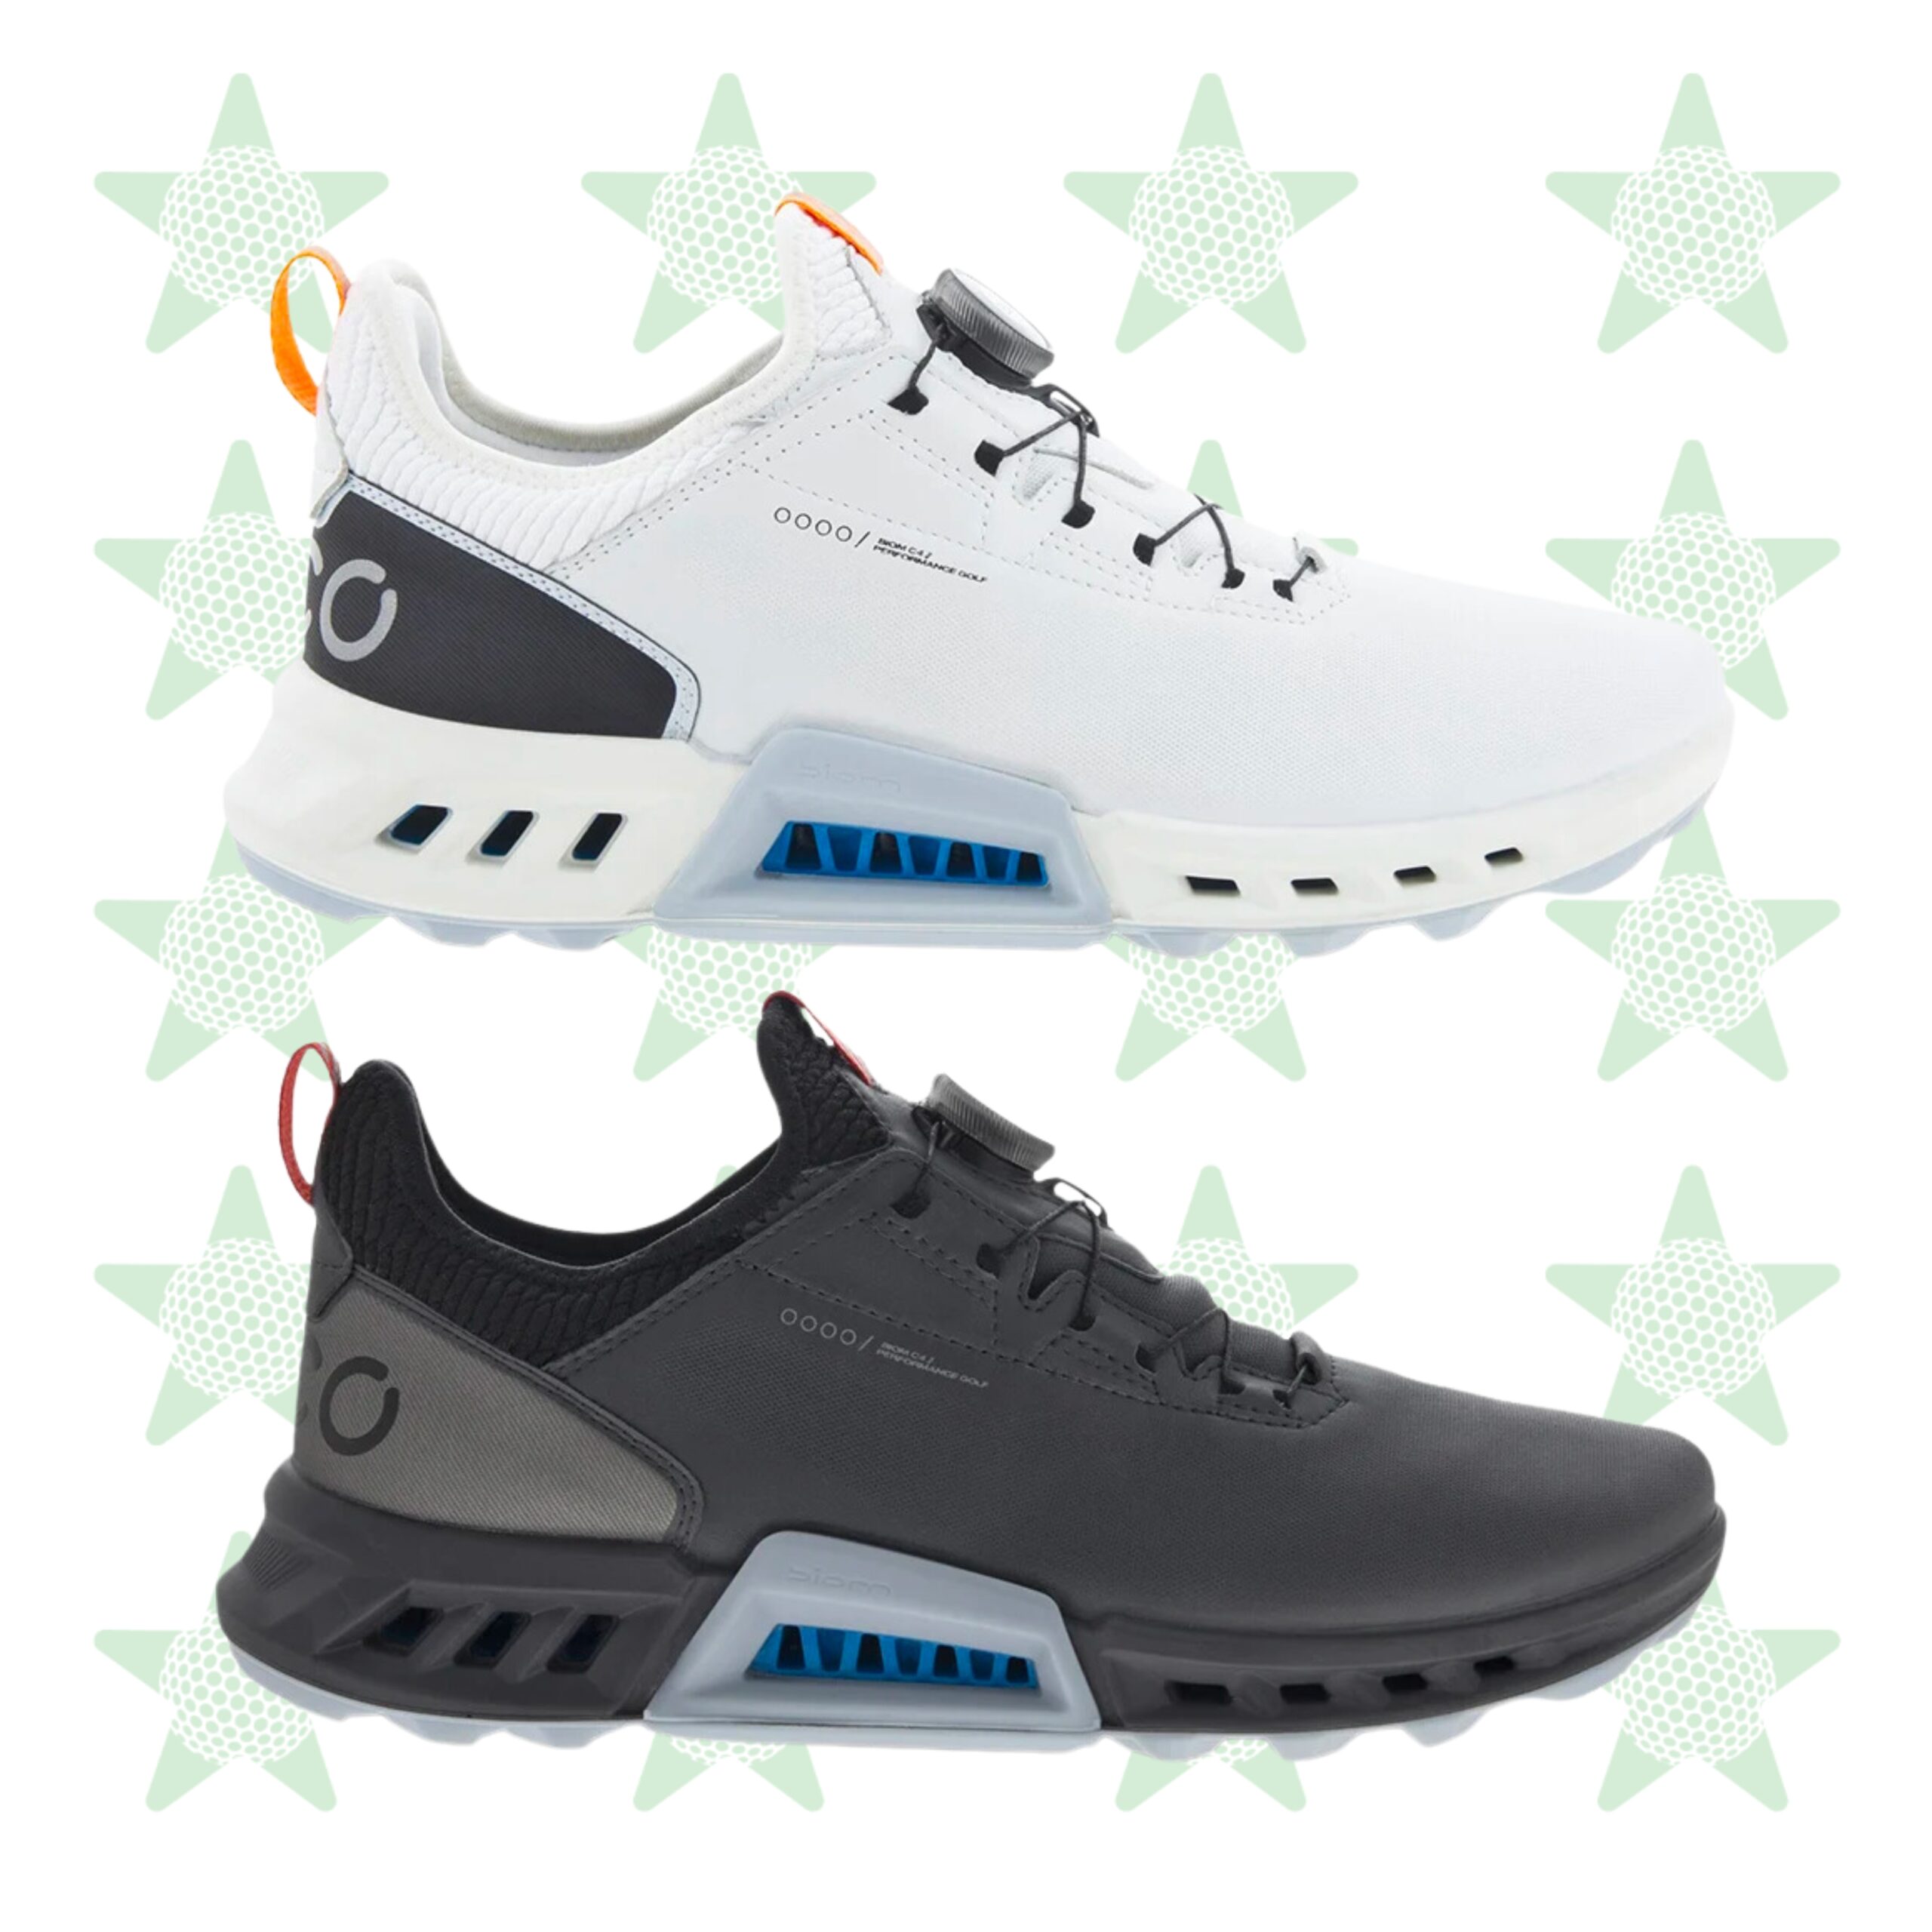 WINNER’S CHOICE PAIR OF ECCO SHOES #14 - Golfstar Competitions